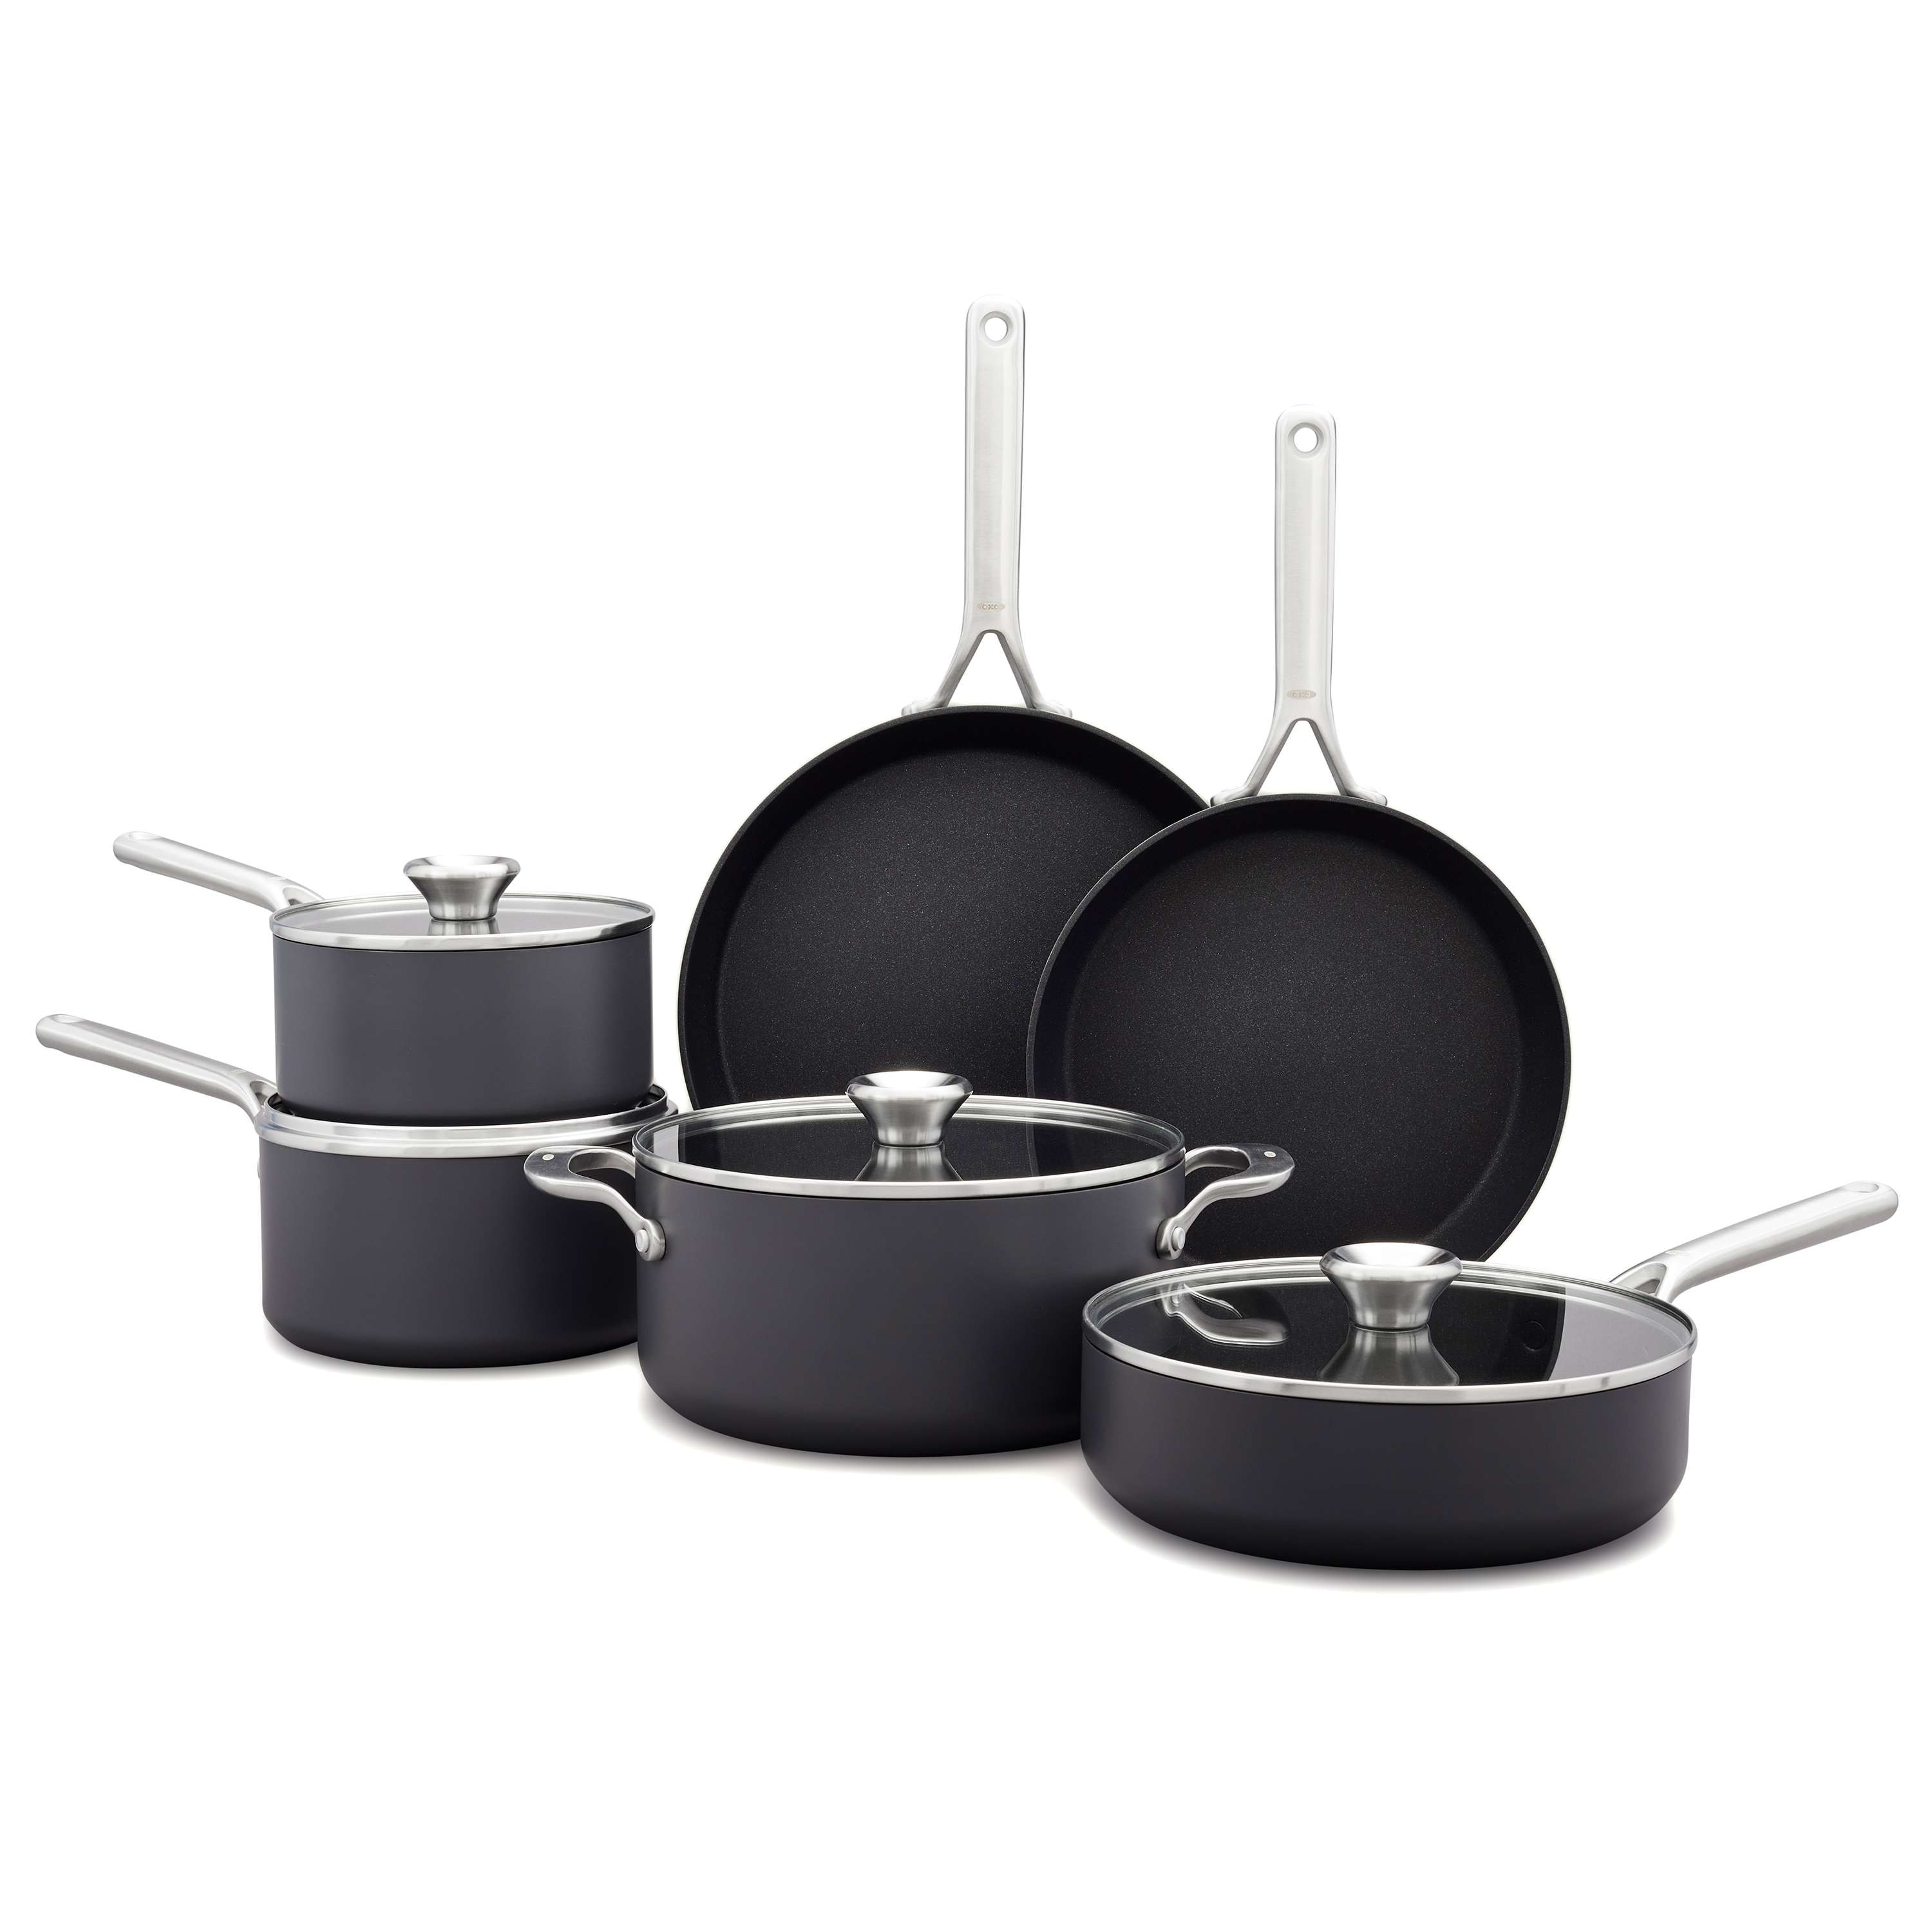 https://ak1.ostkcdn.com/images/products/is/images/direct/b308eda1d58ecad6b5c0c9c8134bd8d327da5f75/OXO-Professional-Ceramic-Non-Stick-10-Piece-Cookware-Pots-and-Pans-Set.jpg